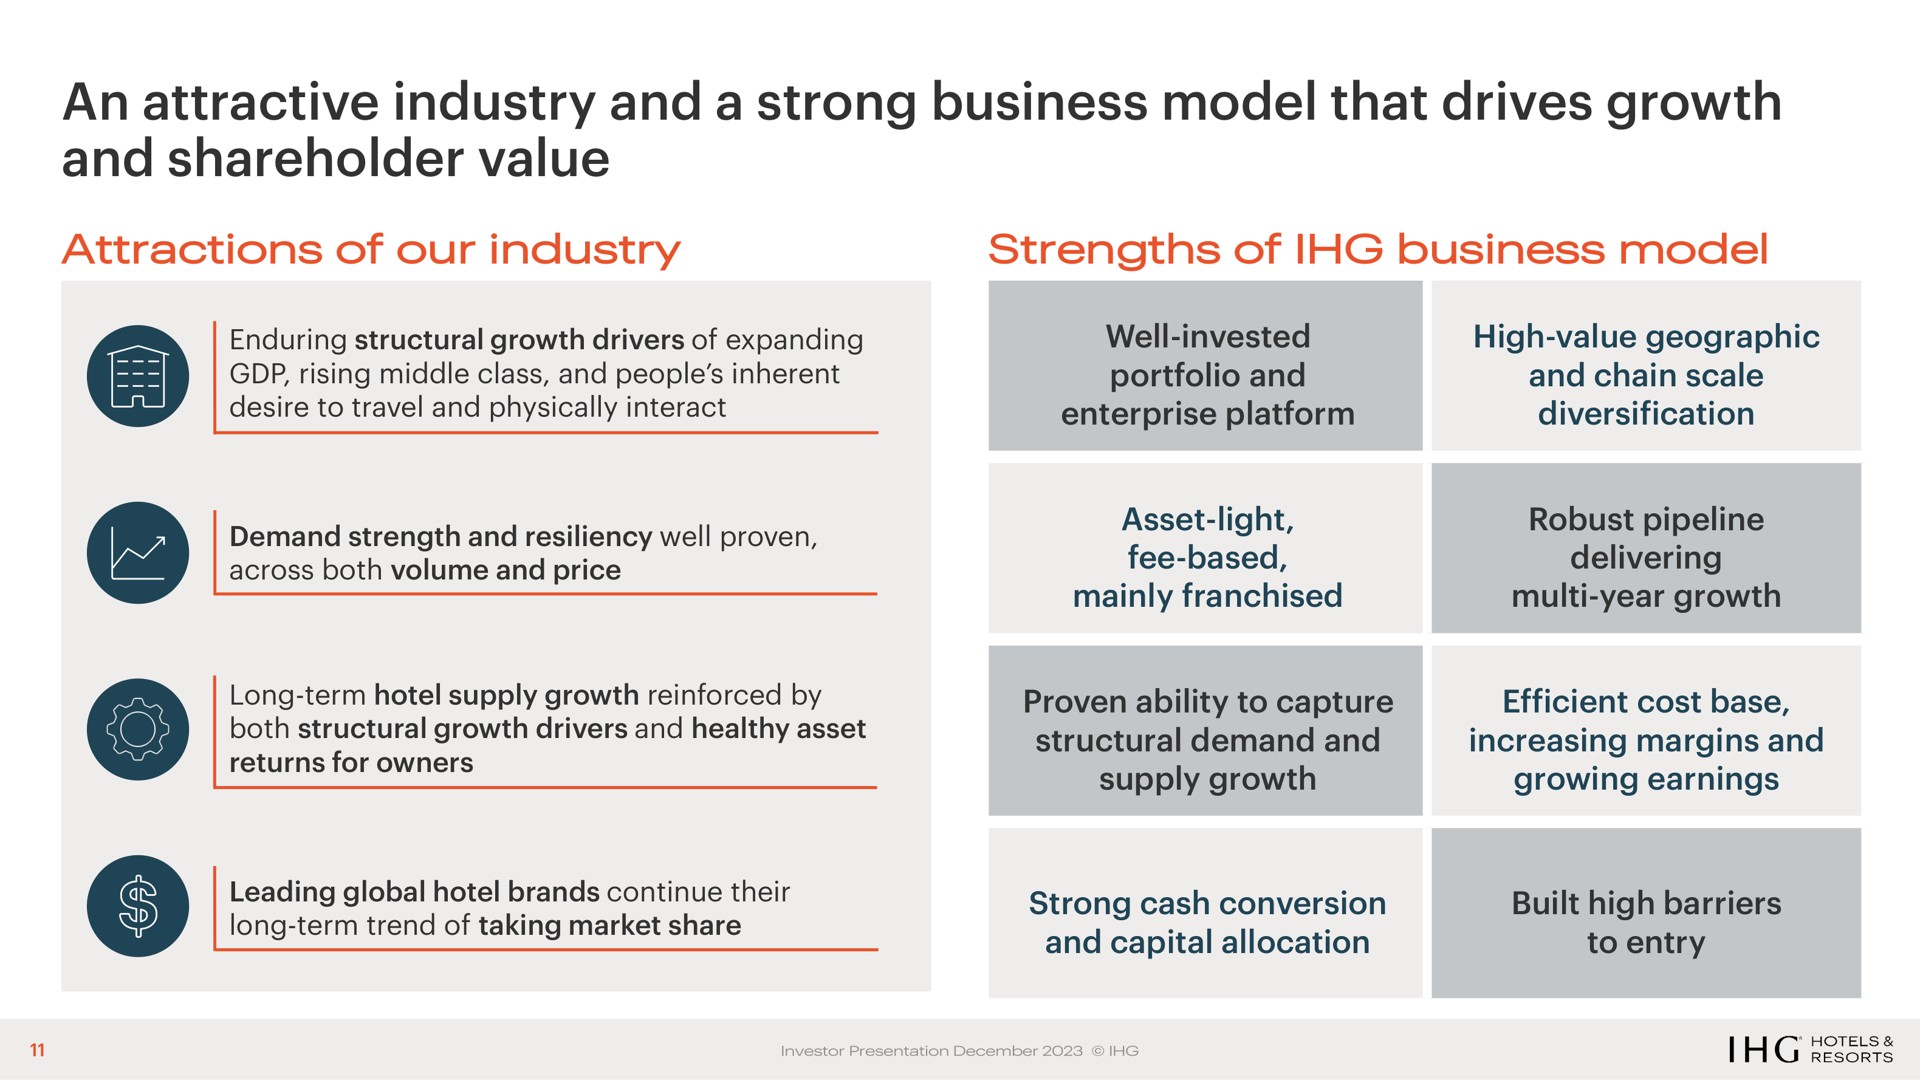 an attractive industry and a strong business model that drives growth and shareholder value | IHG Hotels